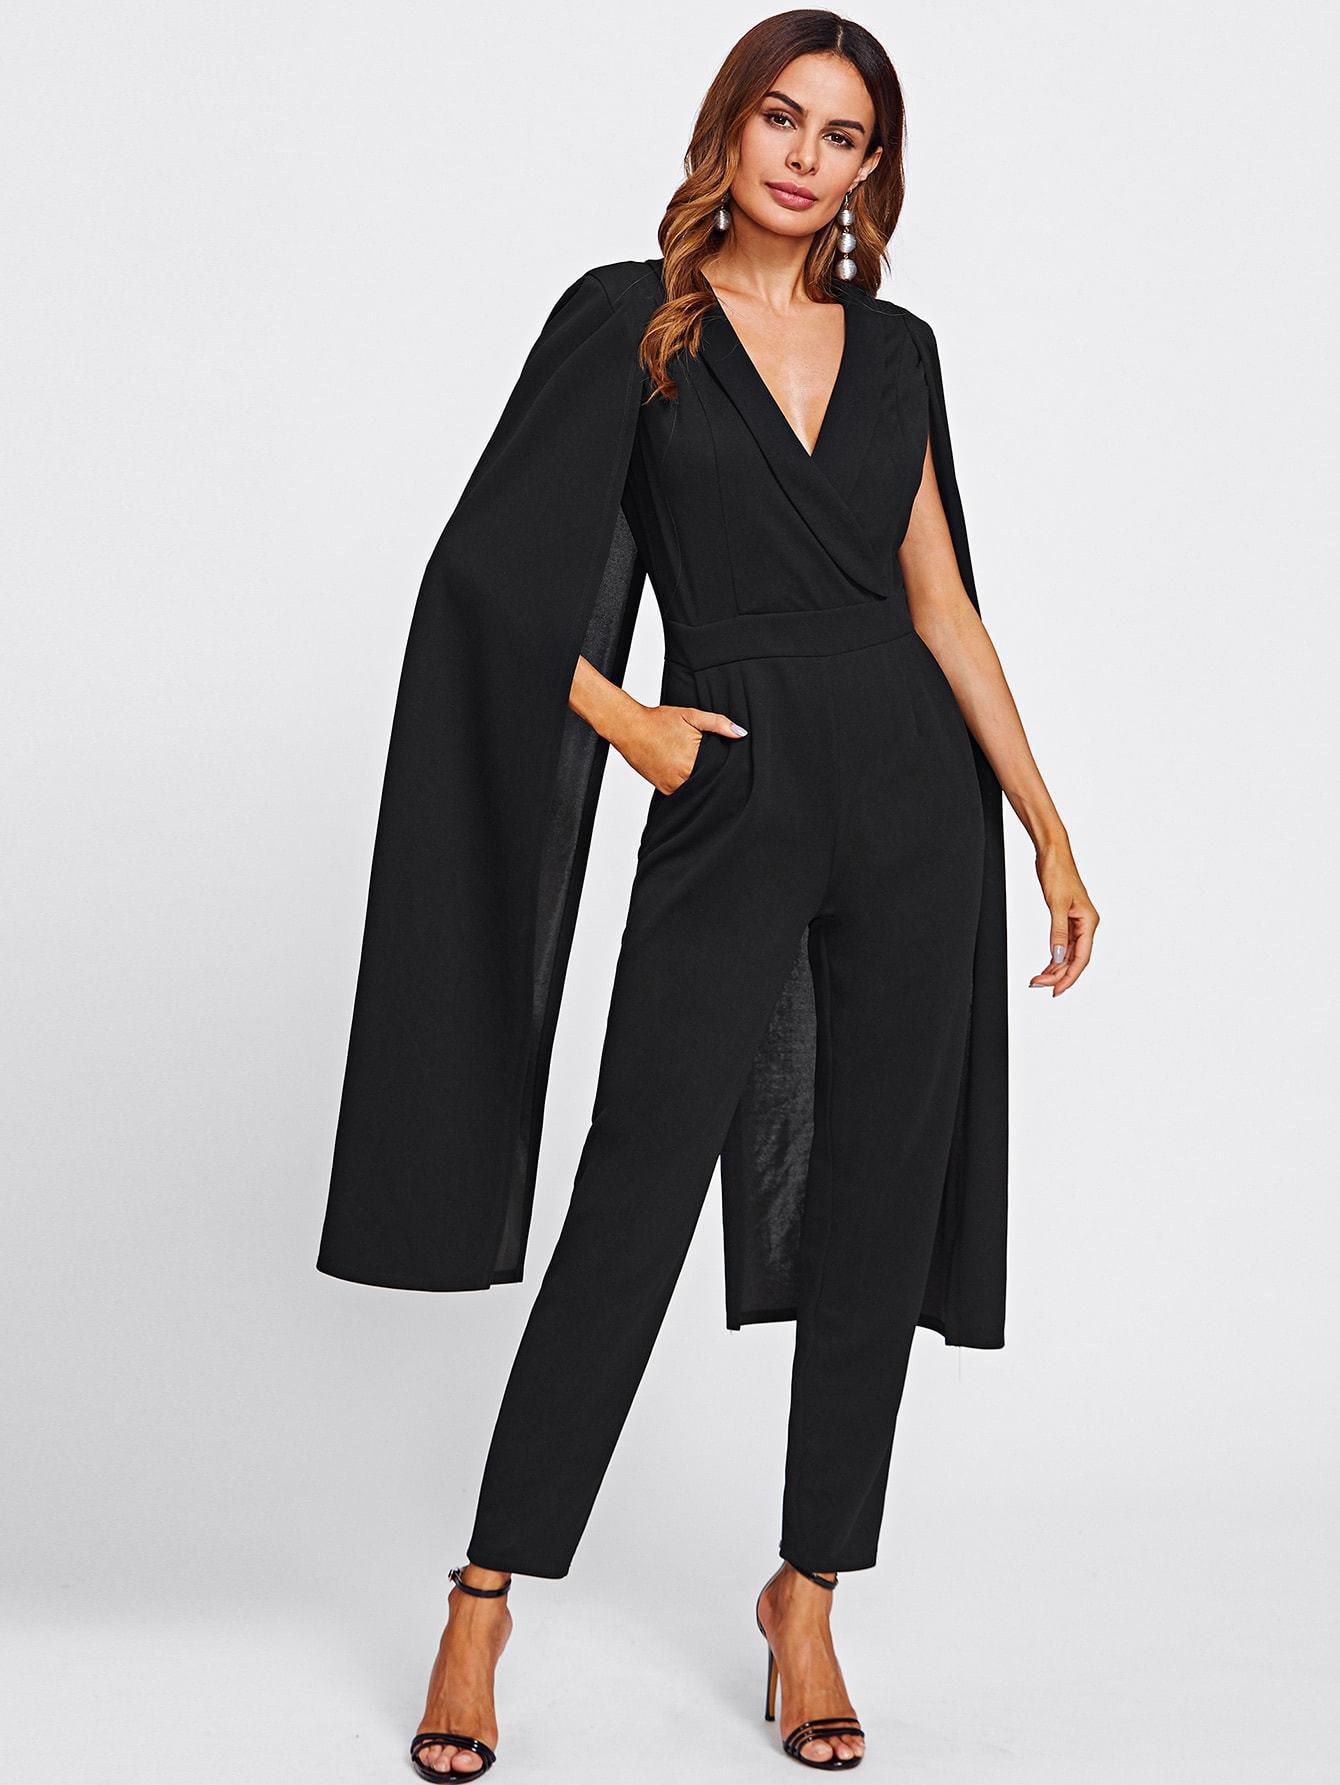 SHEIN | Cape Sleeve Surplice Wrap Tailored Jumpsuit price from yashry ...